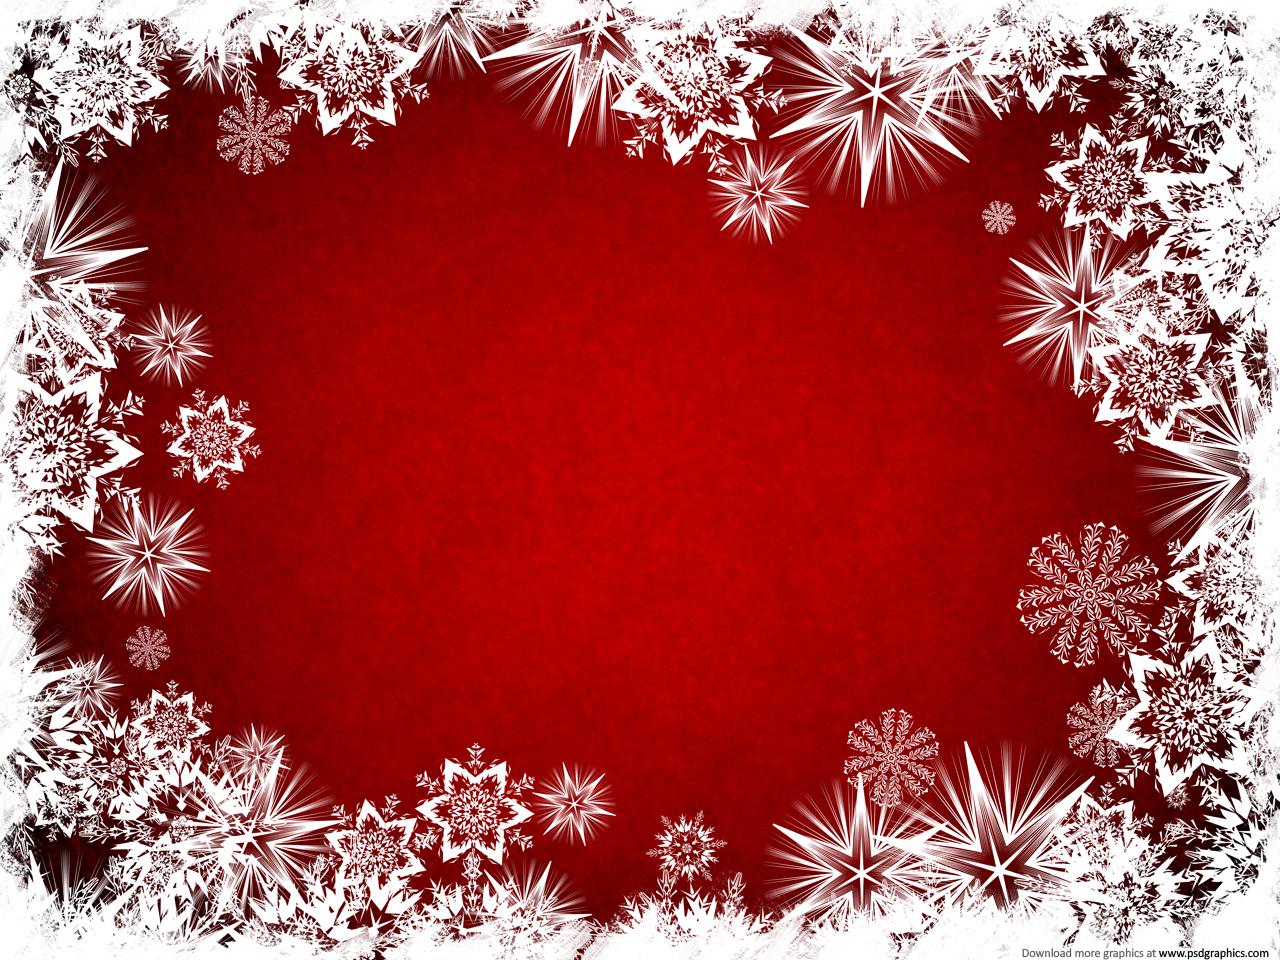 Medium size preview 1280x960px Abstract Christmas background